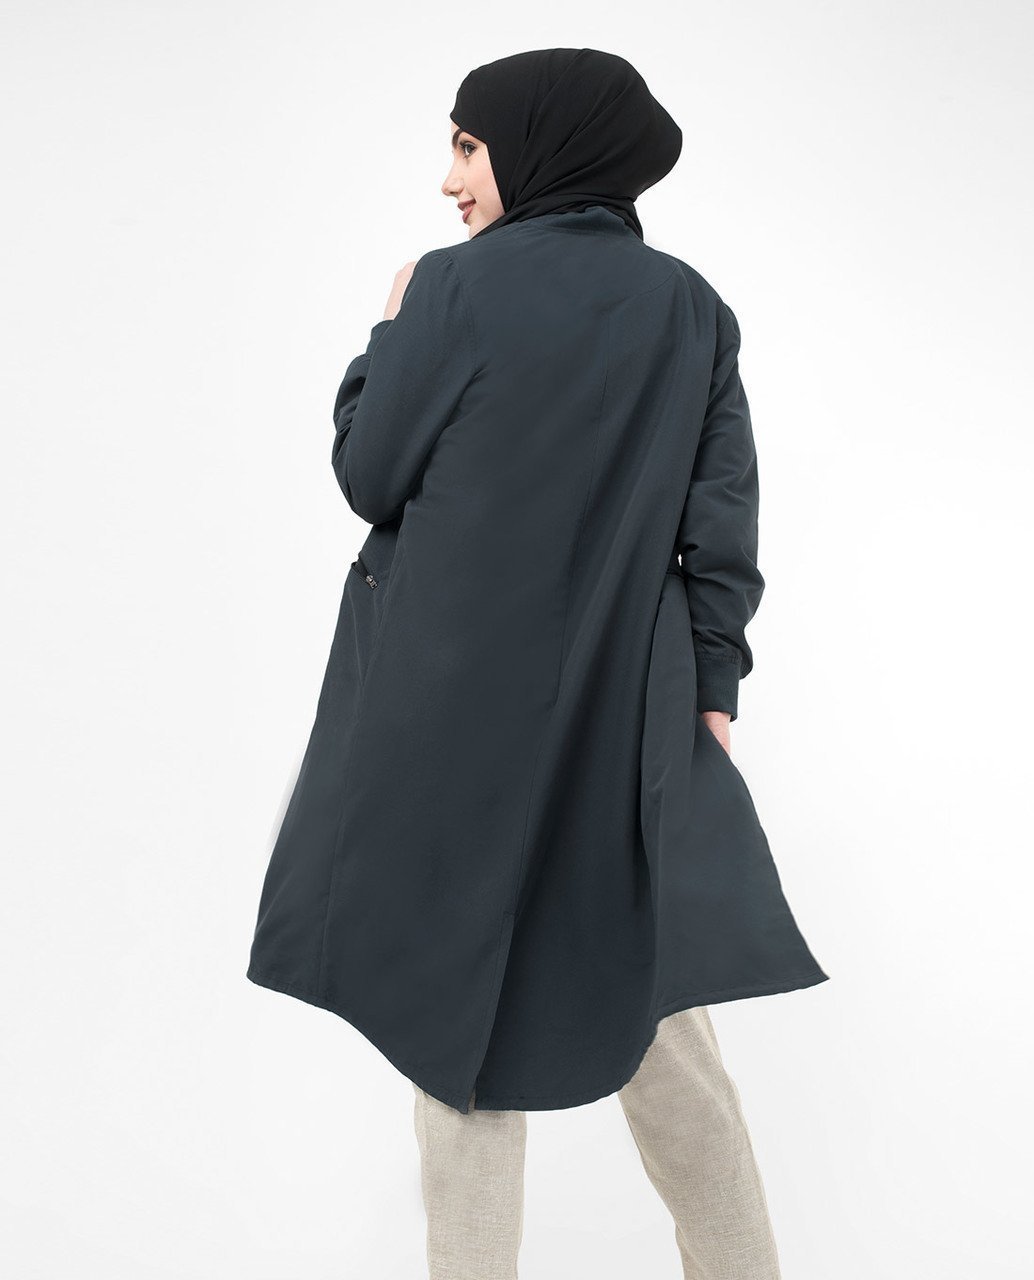 Trendy Outfit Modest Jacket Light Outerwear in Navy Blue - ModestPath.com